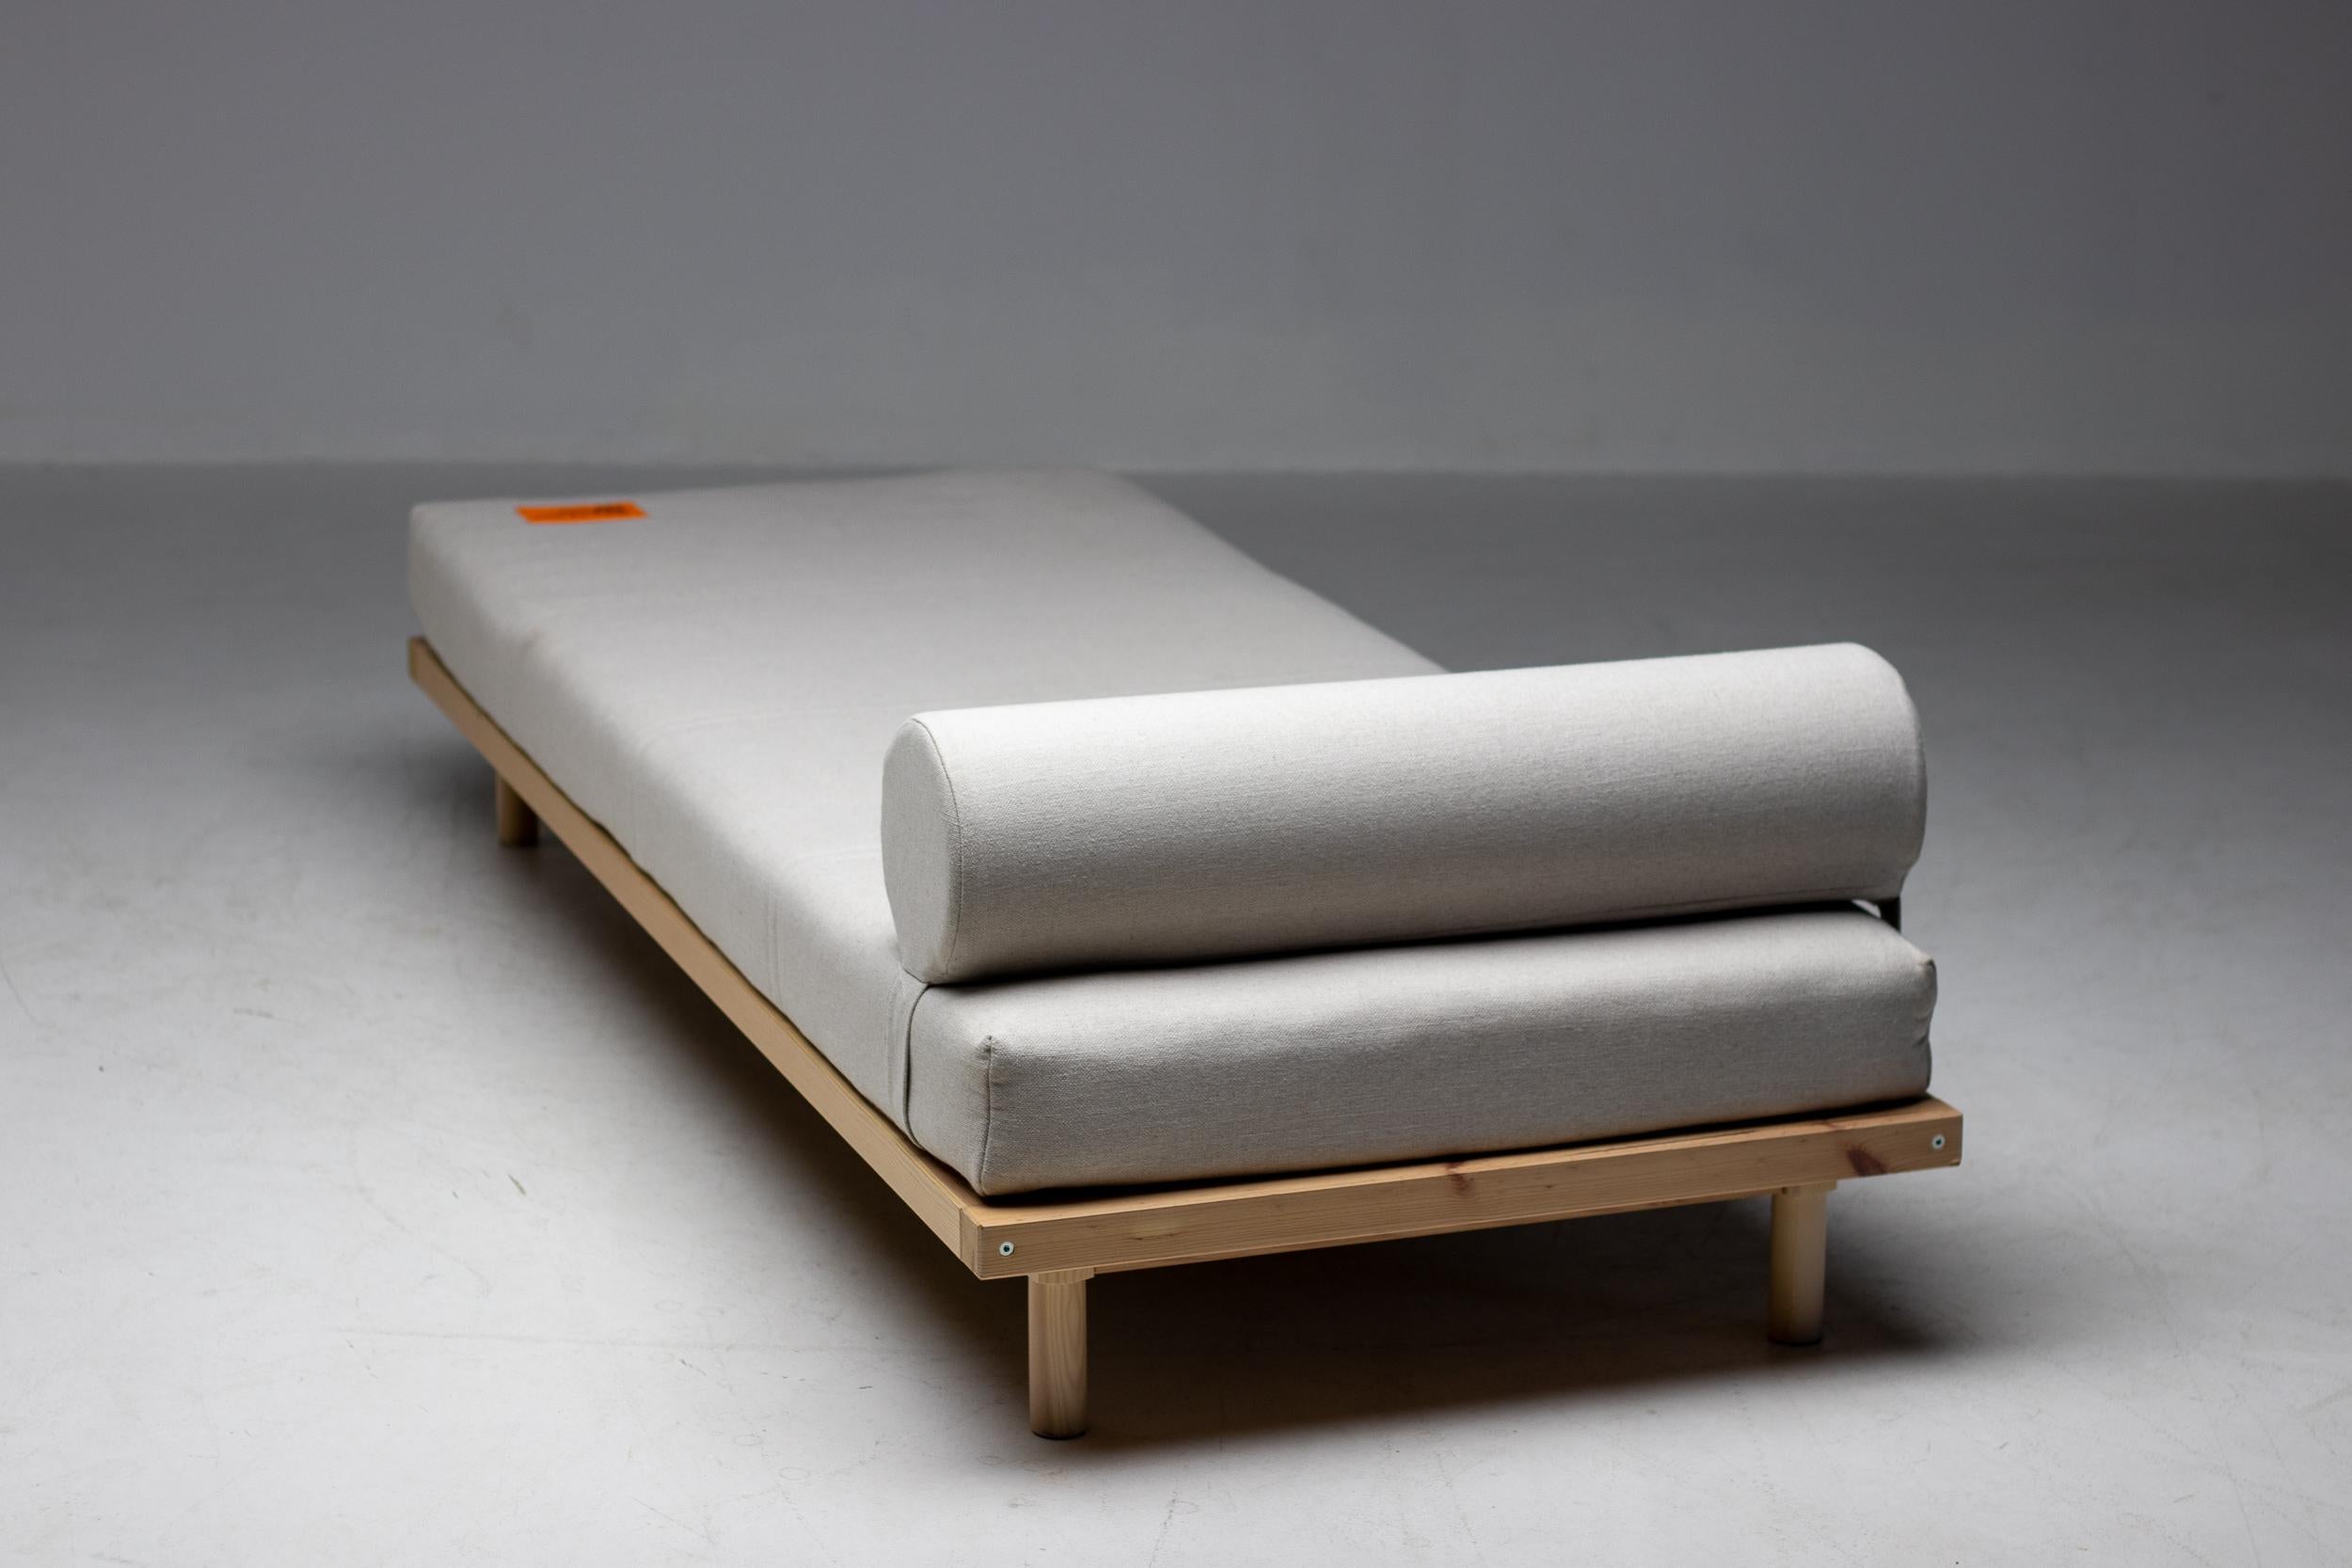 virgil abloh ikea daybed